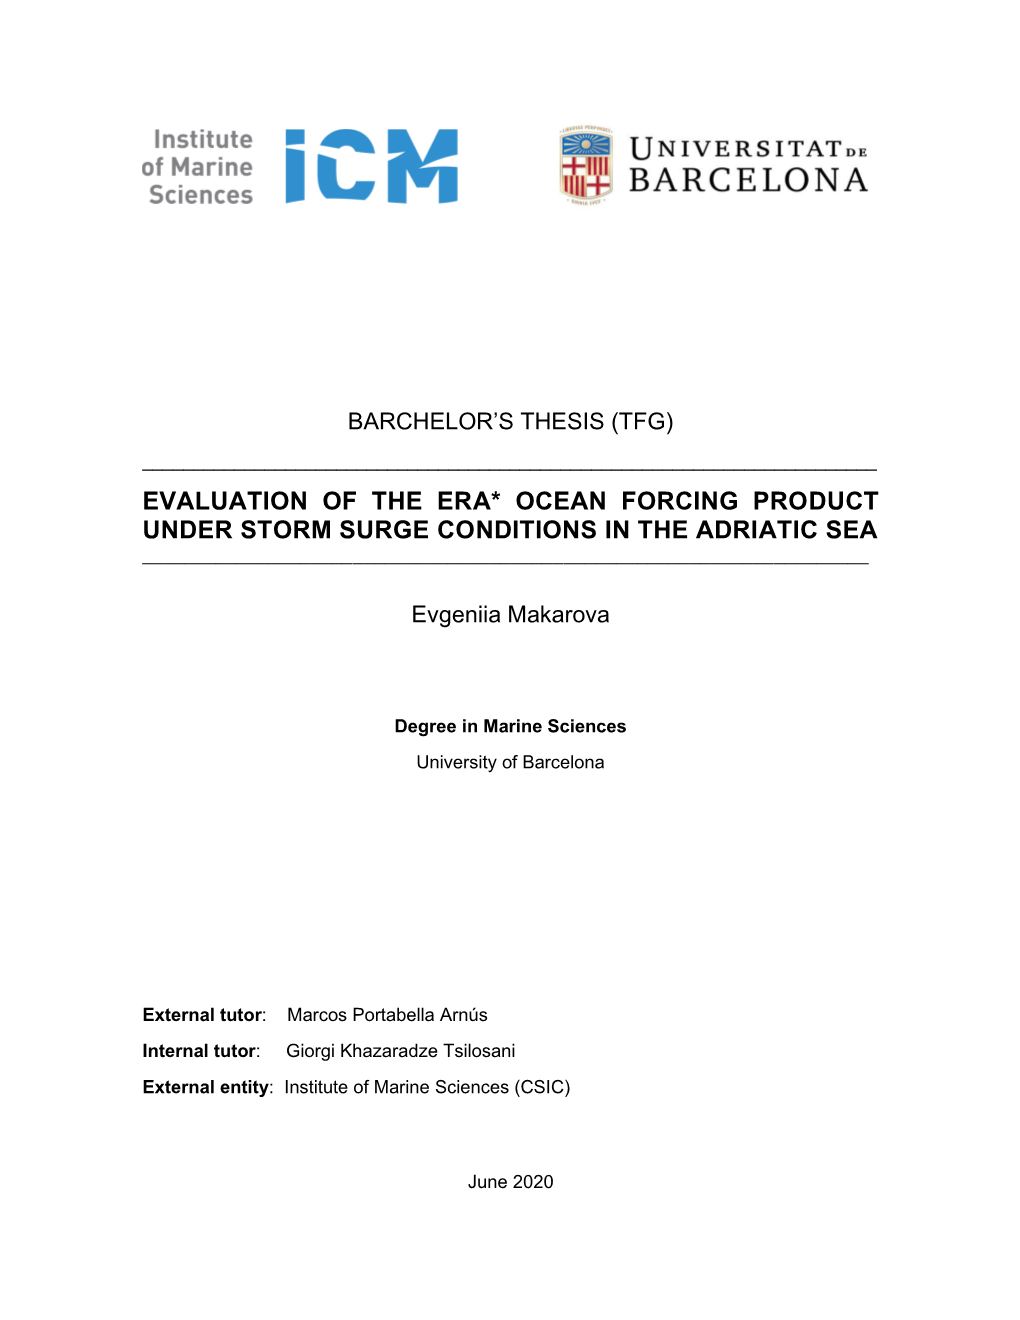 Evaluation of the Era* Ocean Forcing Product Under Storm Surge Conditions in the Adriatic Sea ______